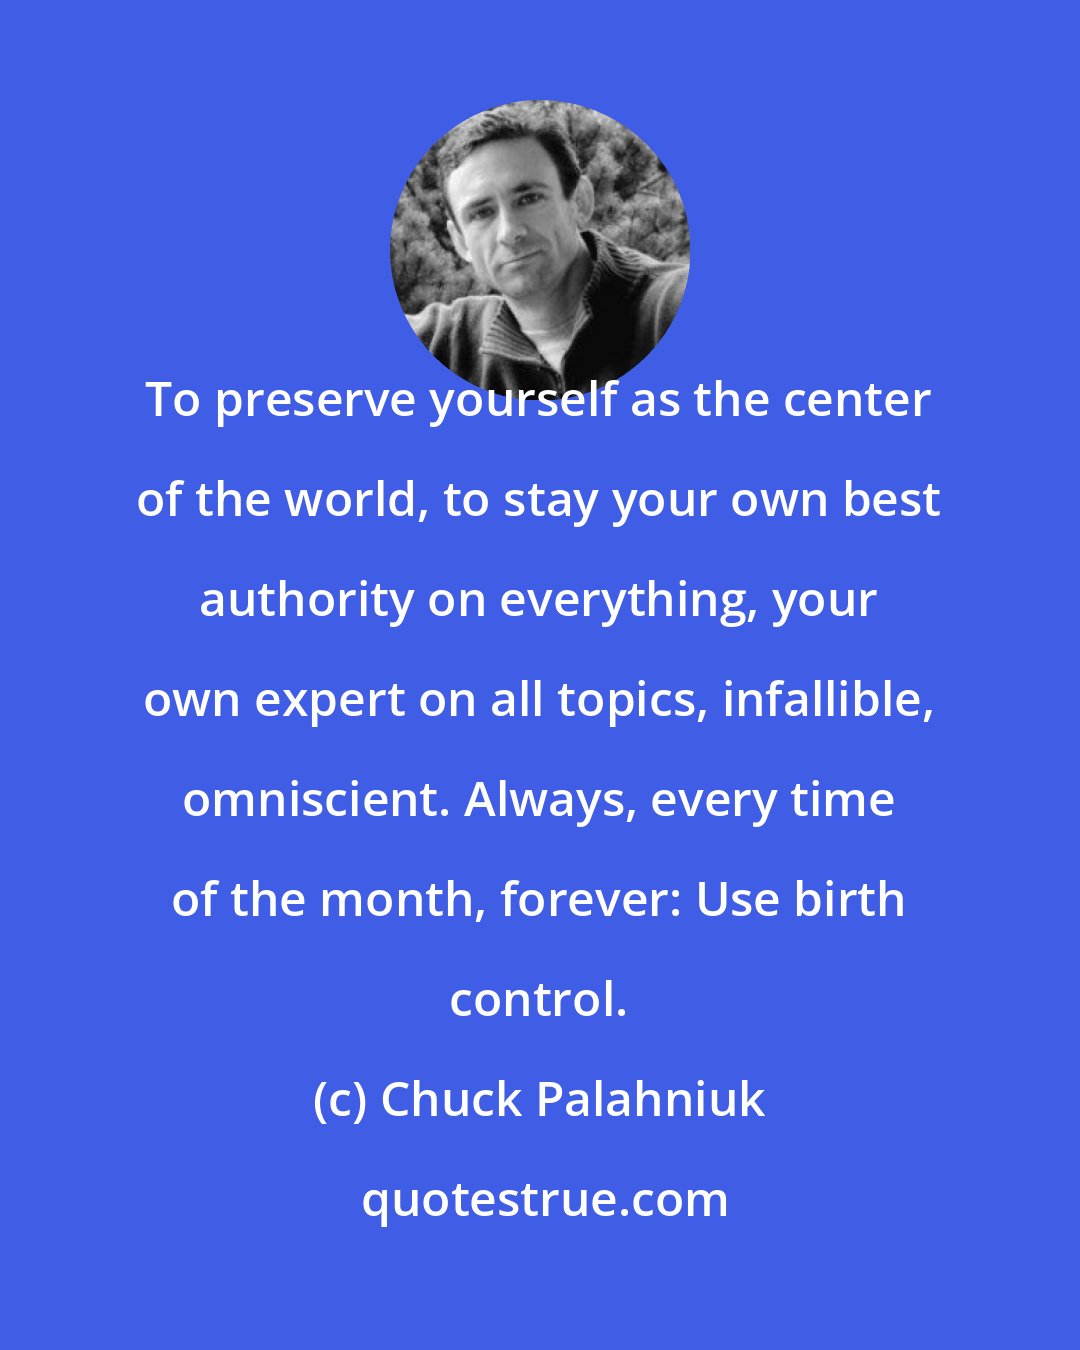 Chuck Palahniuk: To preserve yourself as the center of the world, to stay your own best authority on everything, your own expert on all topics, infallible, omniscient. Always, every time of the month, forever: Use birth control.